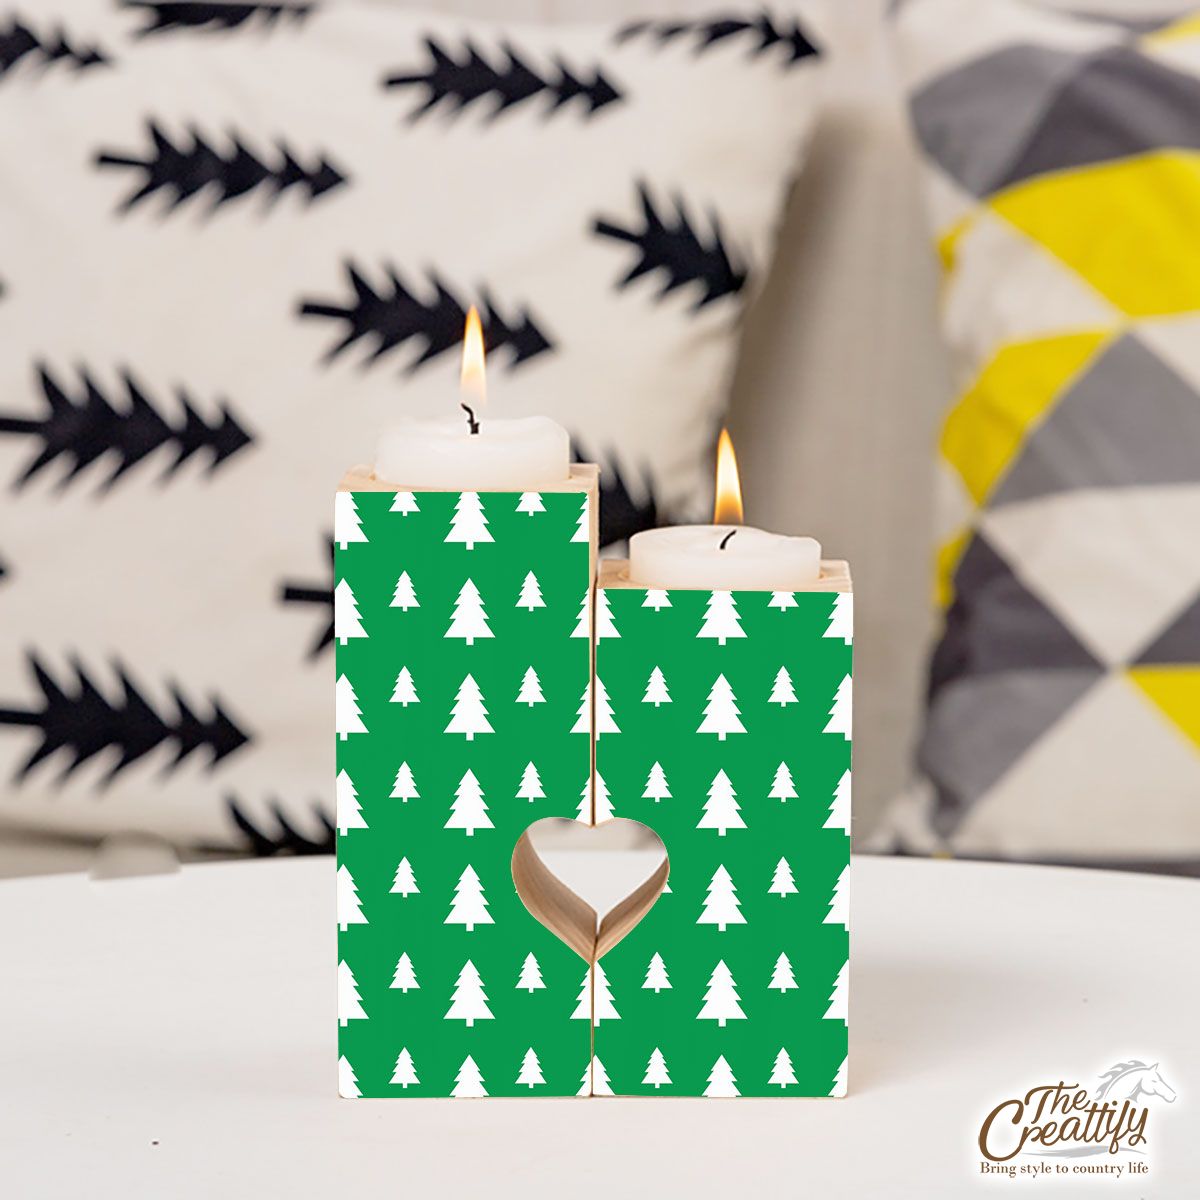 Christmas Tree, Christmas Tree Decorations, Pine Tree Pattern On Green 3 Heart Wooden Candlestick | Wooden